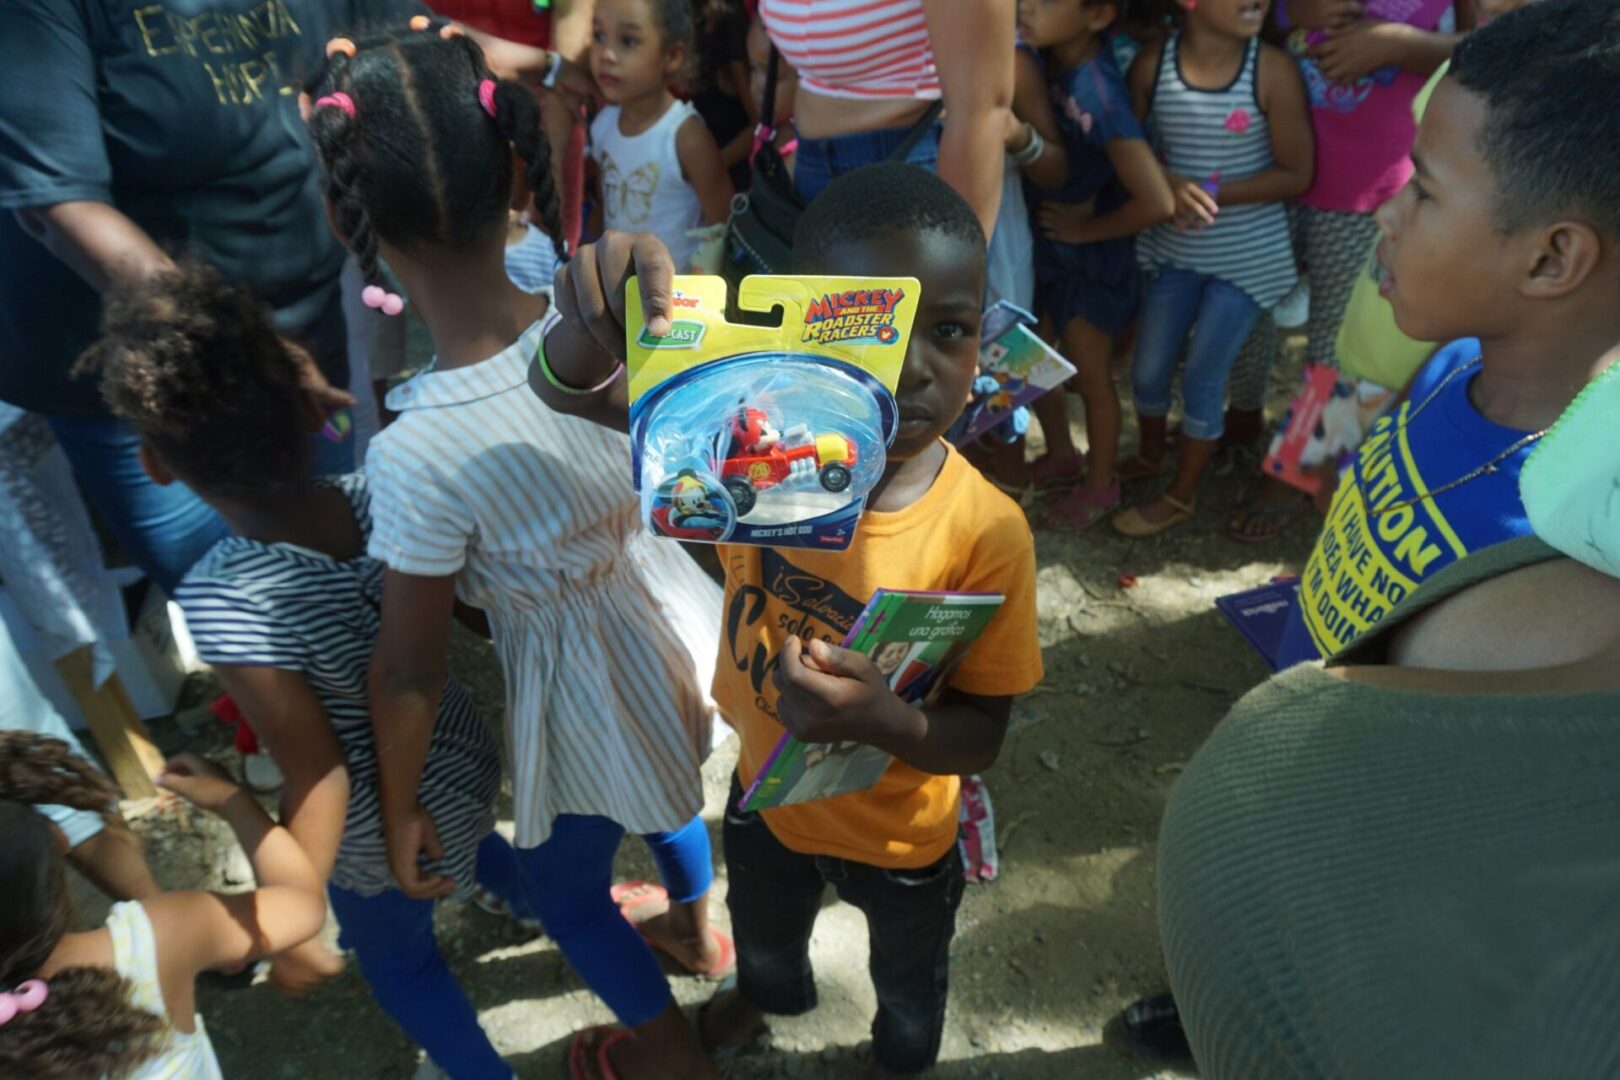 A child carrying a book and showing the toy car he got